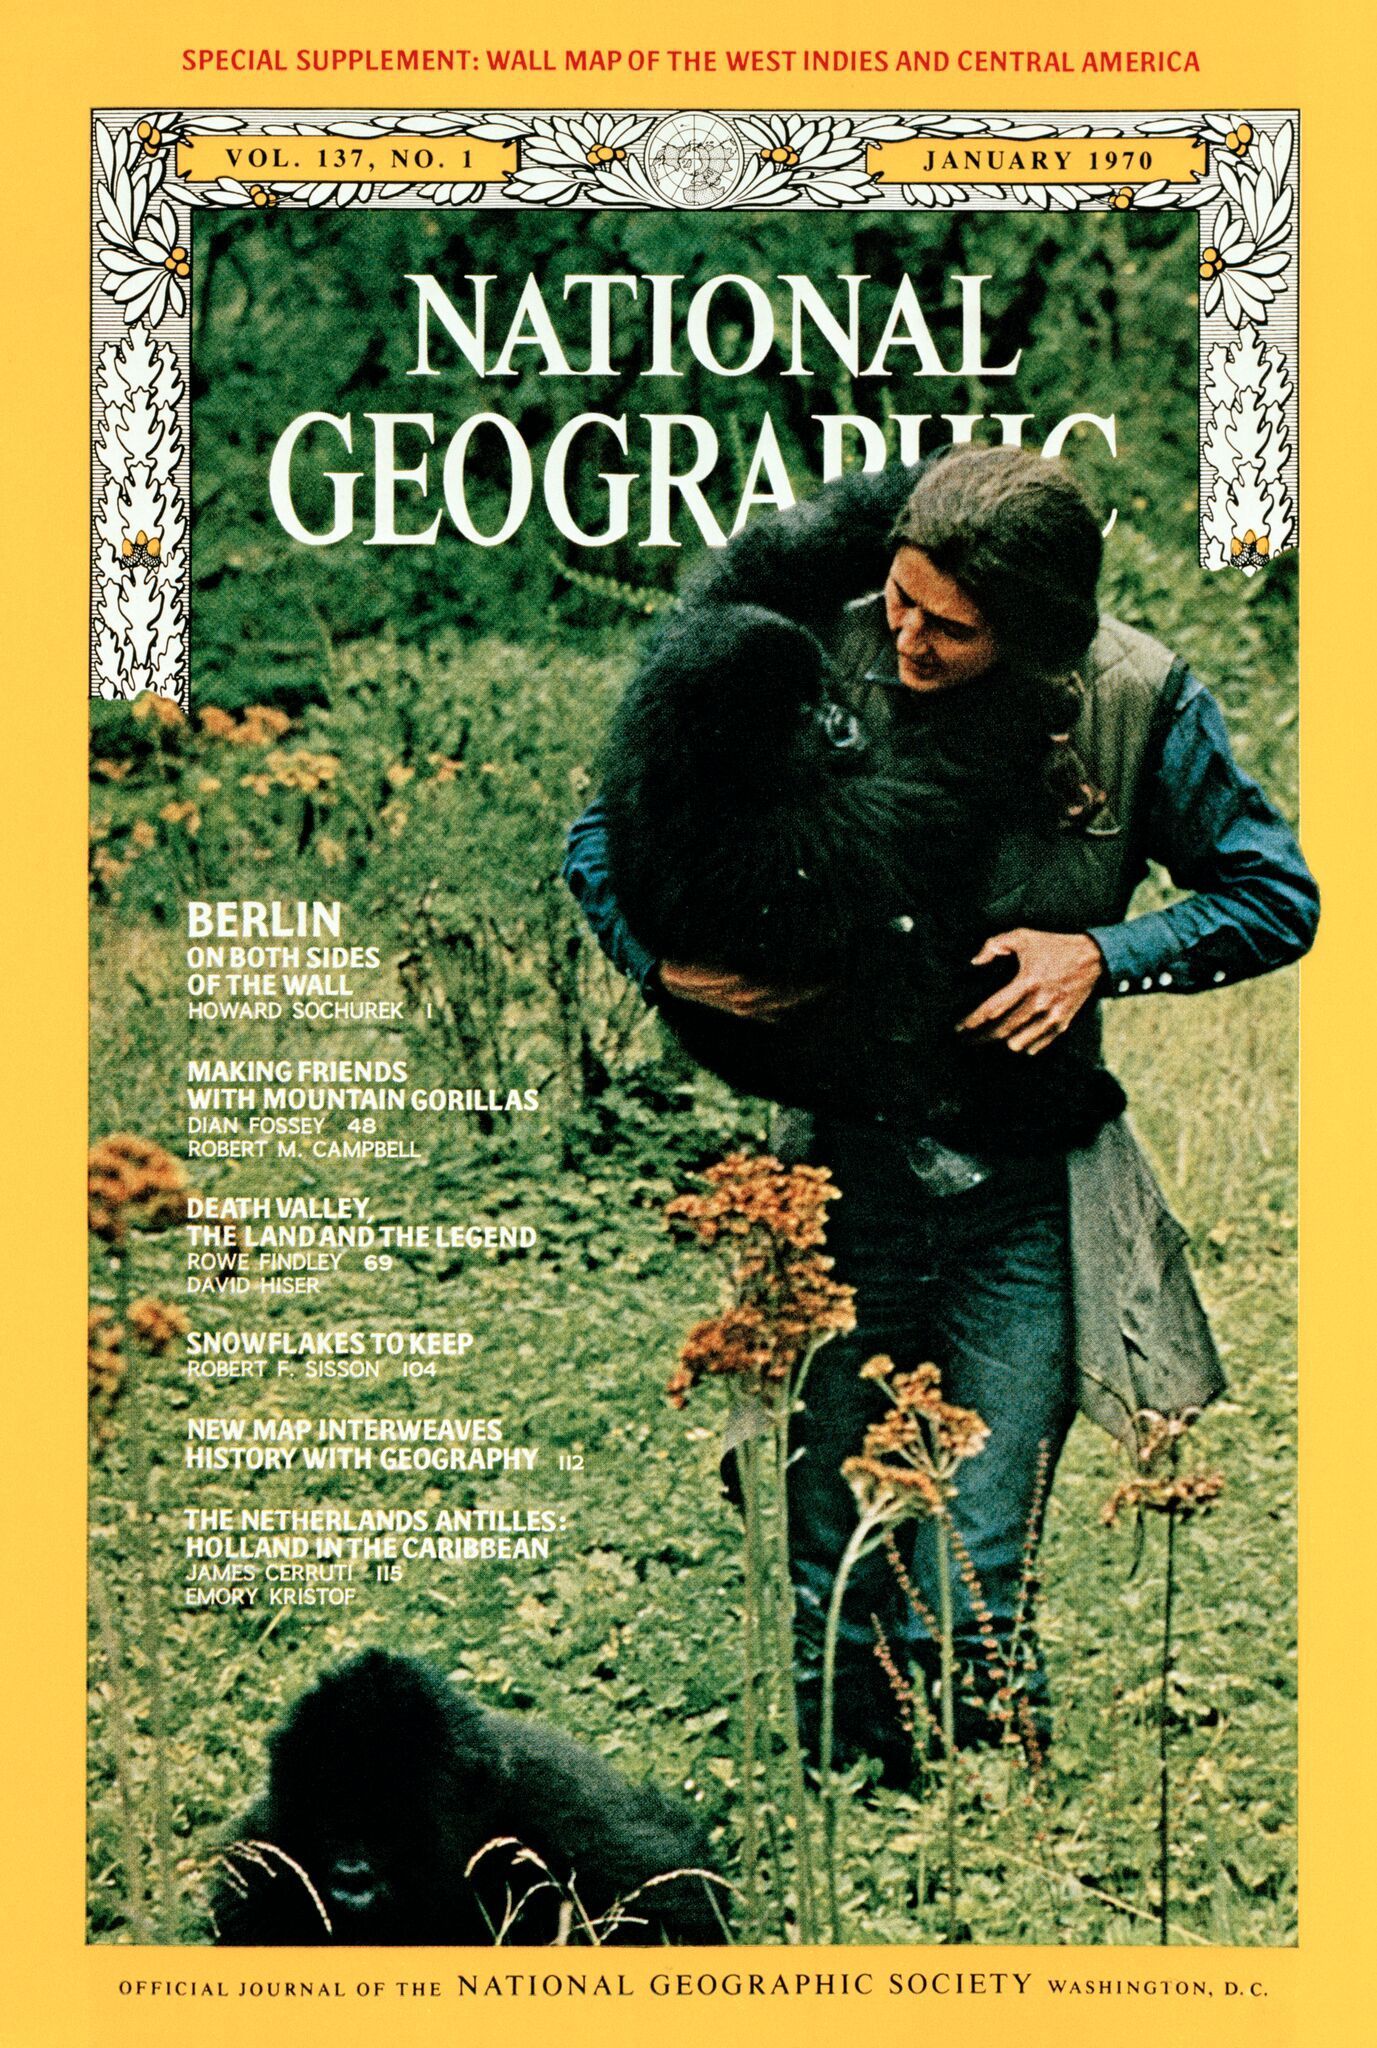 Picture of Dian Fossey on the cover of the January 1970 National Geographic magazine